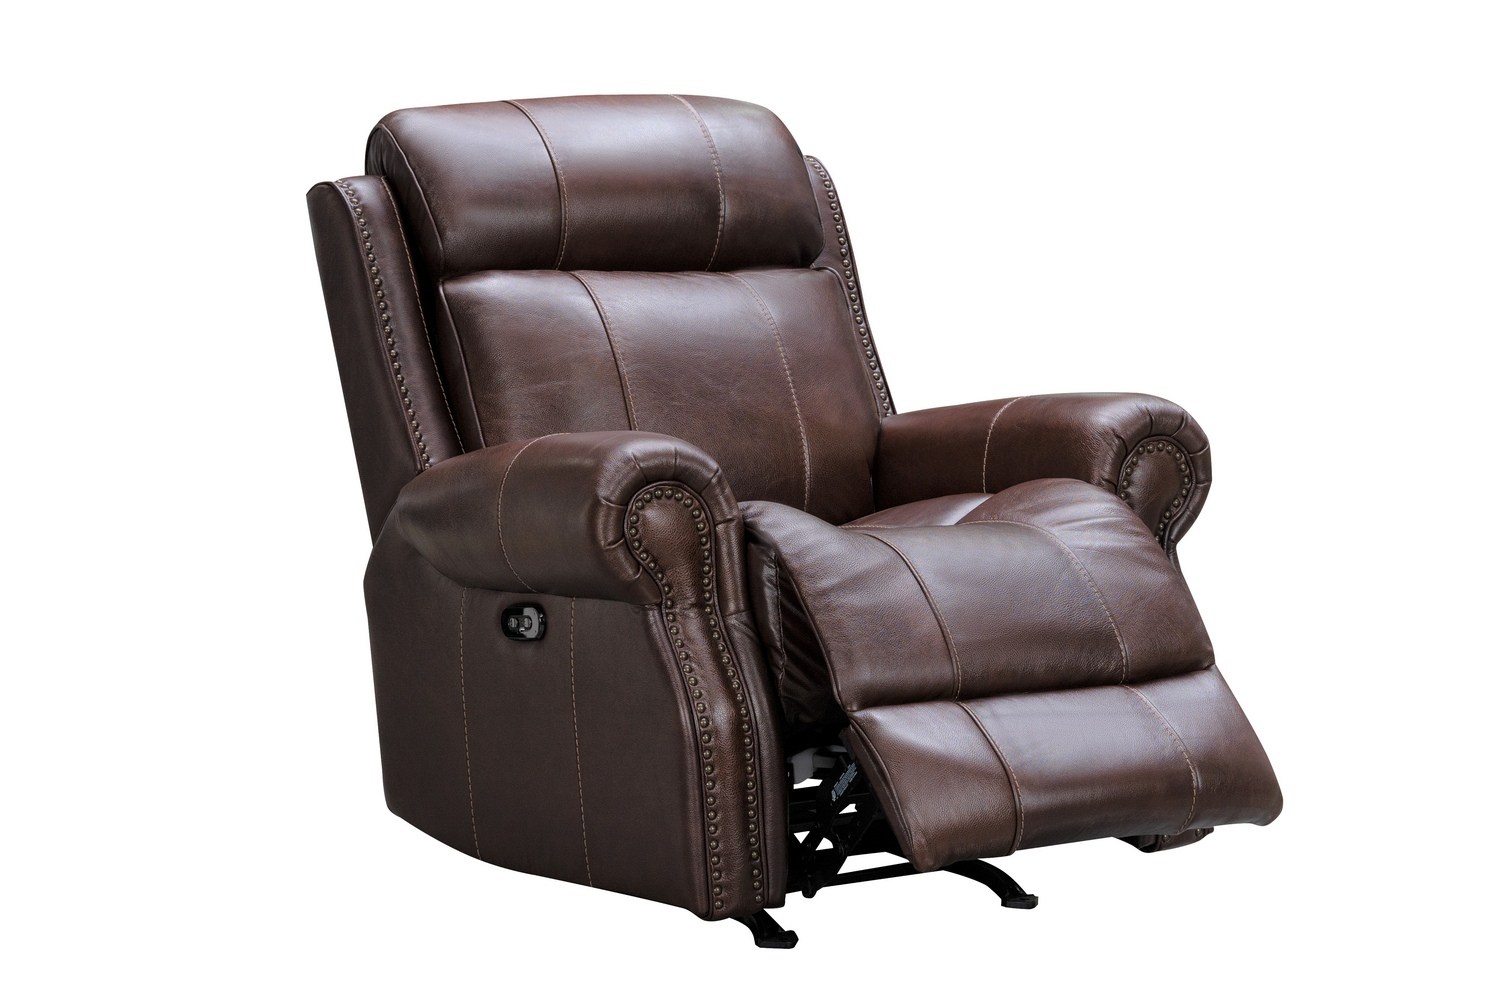 Barcalounger Demara Rocker Recliner Chair with Power and Power Head Rest - El Paso Walnut/Leather match